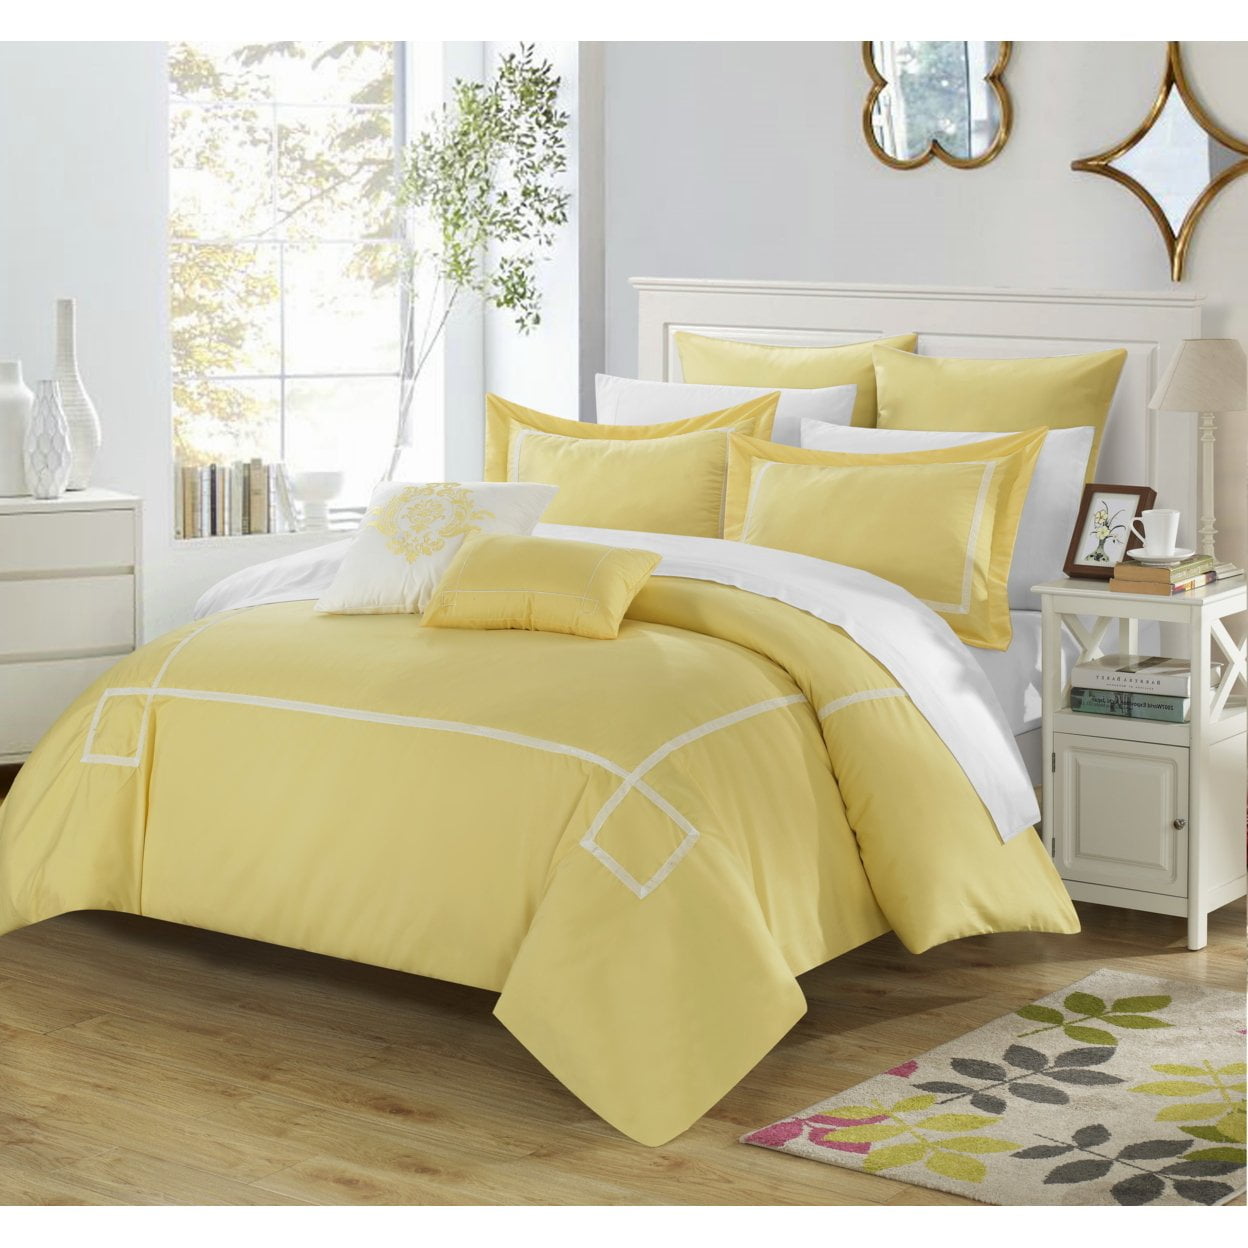 Cs0431-11-us Woodford Embroidered Comforter Set - Yellow - King - 7 Piece